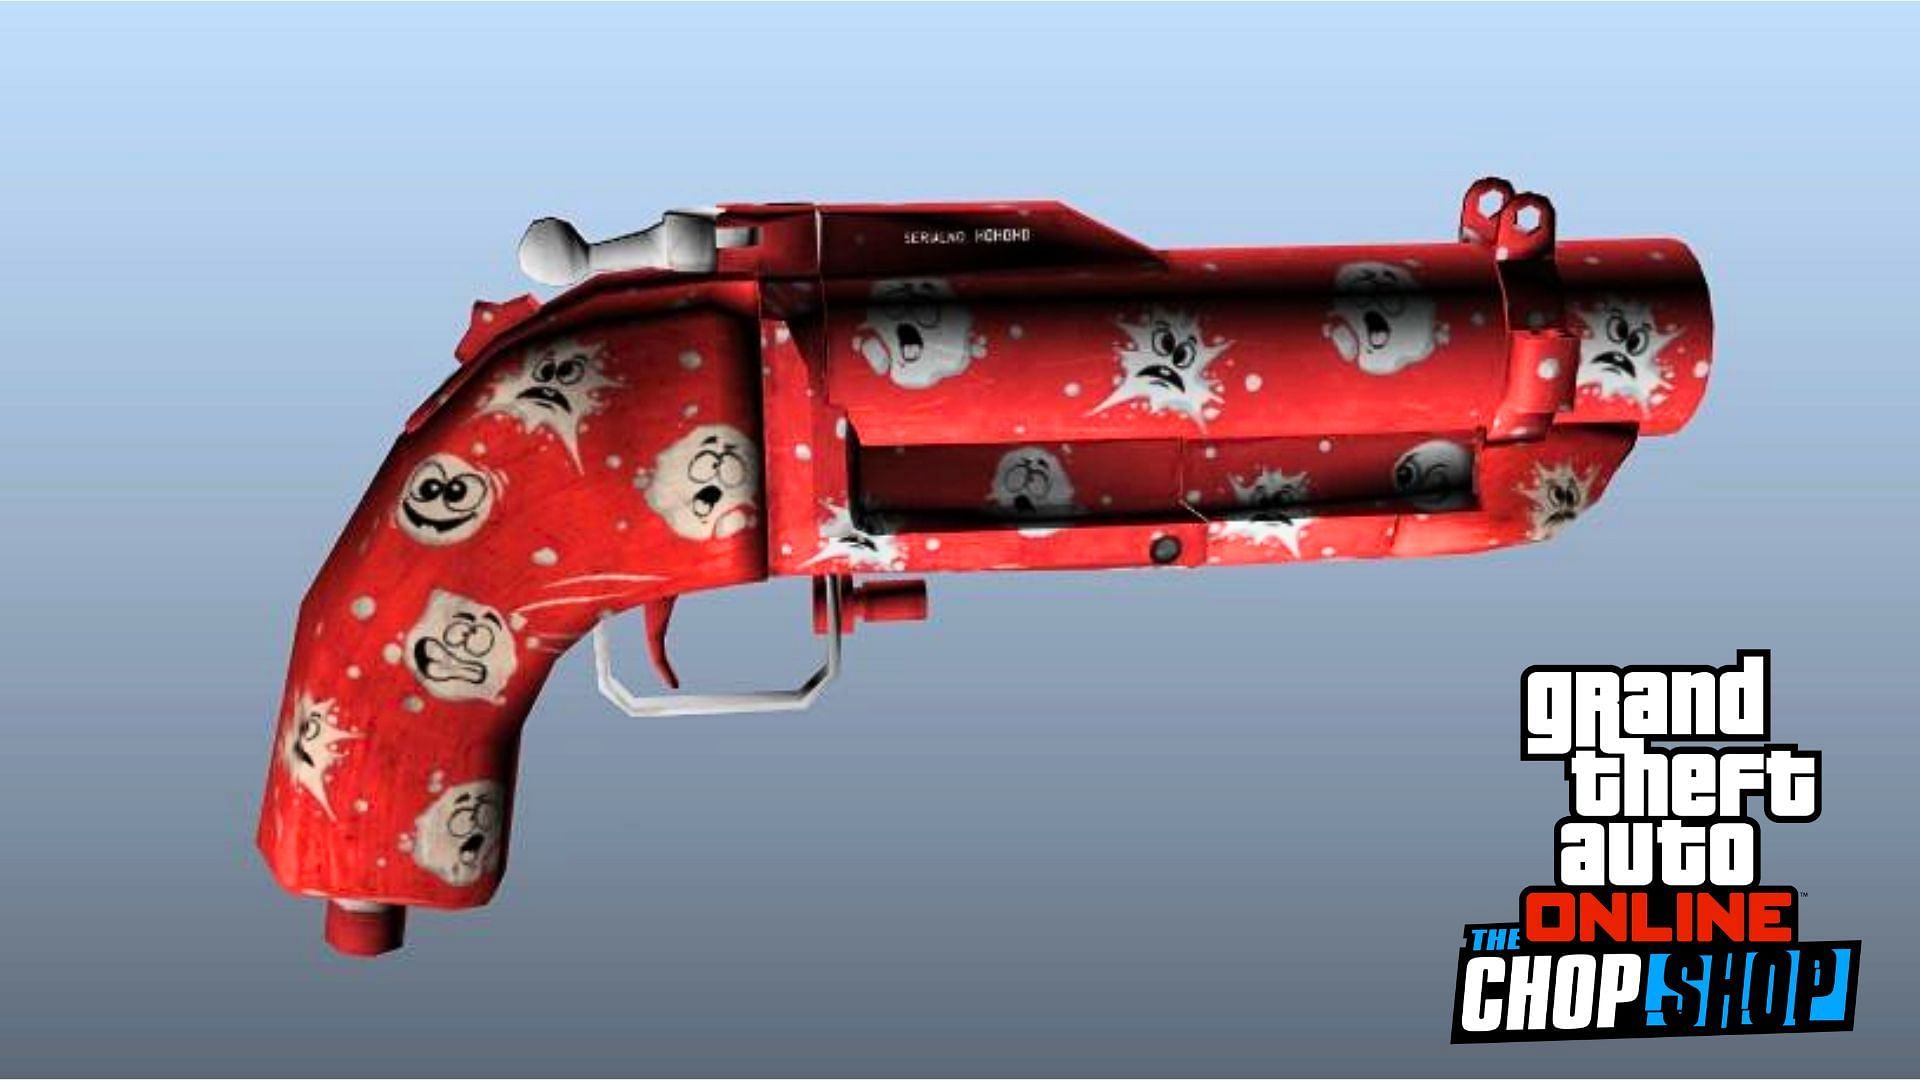 The Snowball Launcher as seen in the GTA Online: The Chop Shop DLC game files (Image via X/@NeedForMadnessA)